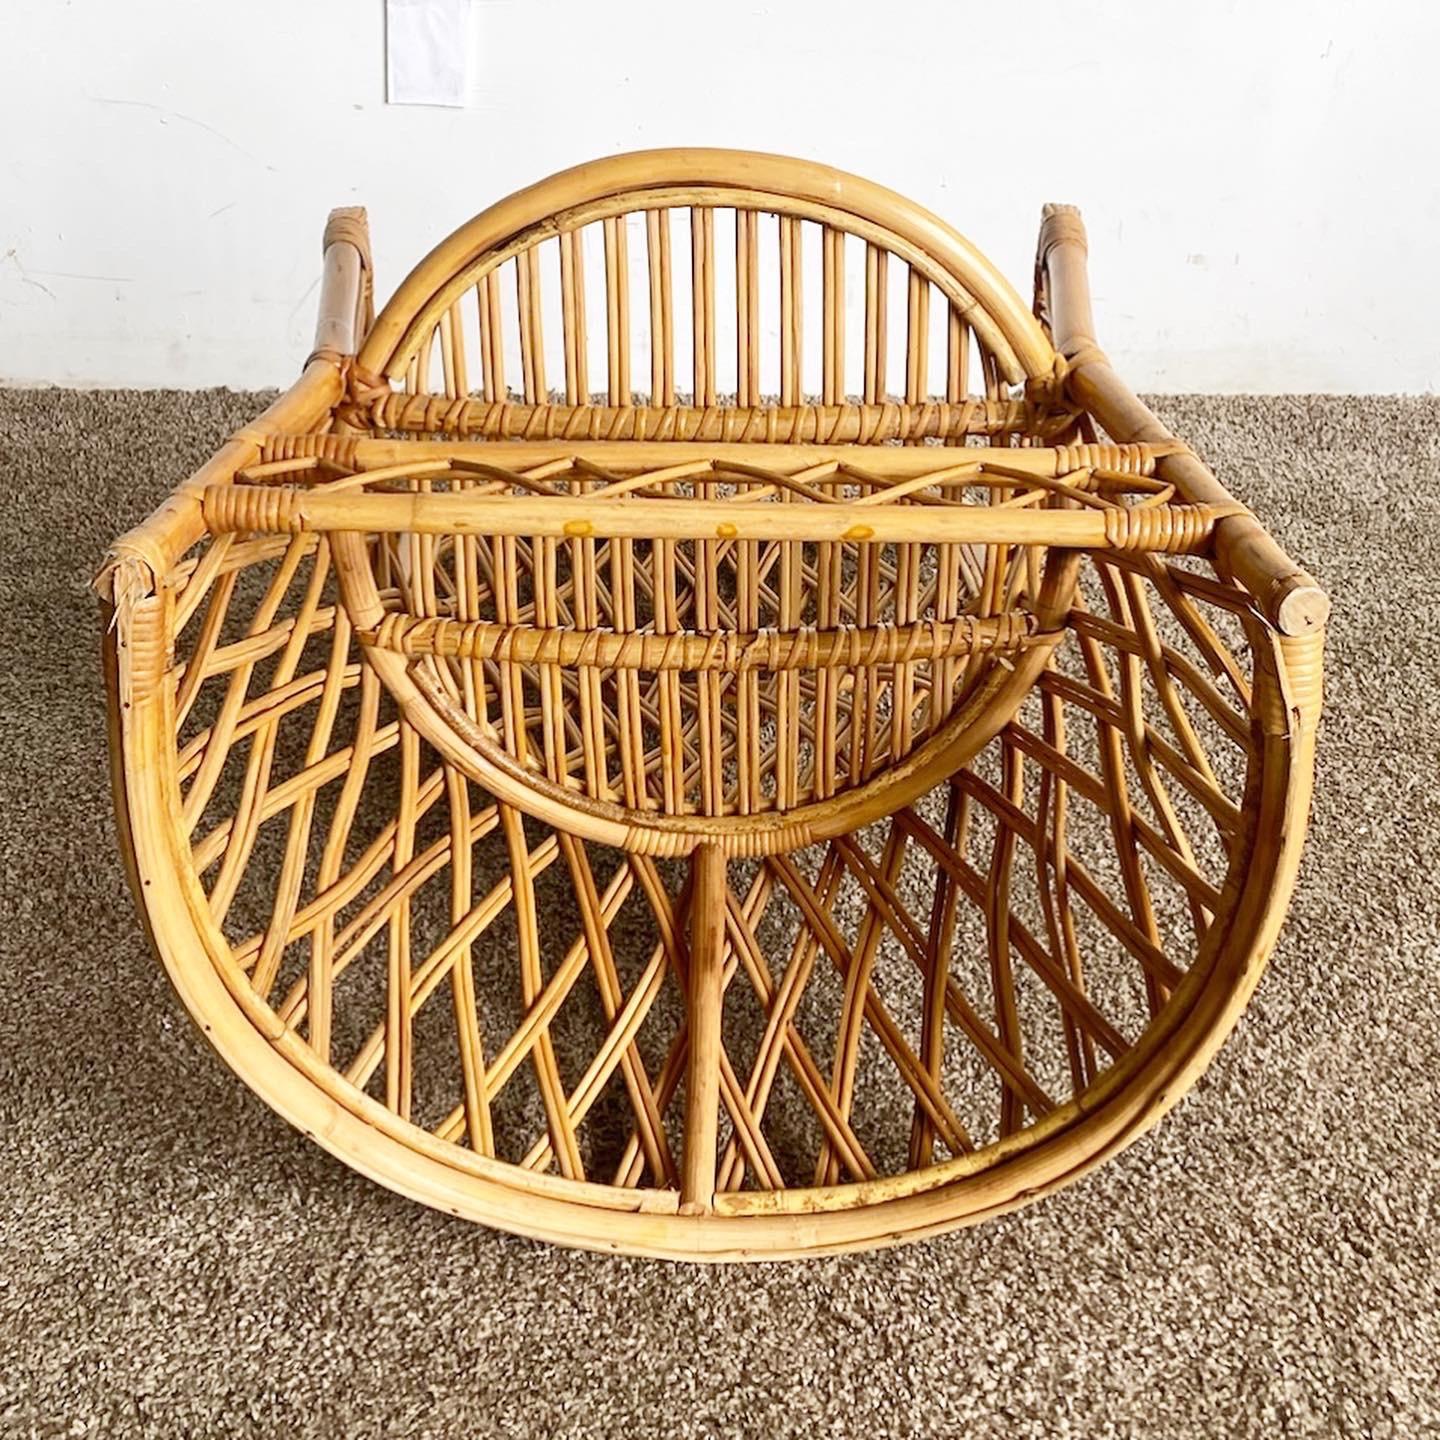 Philippine Boho Chic Bamboo Rattan Side Chair With Circular Brown Seat Cushion For Sale